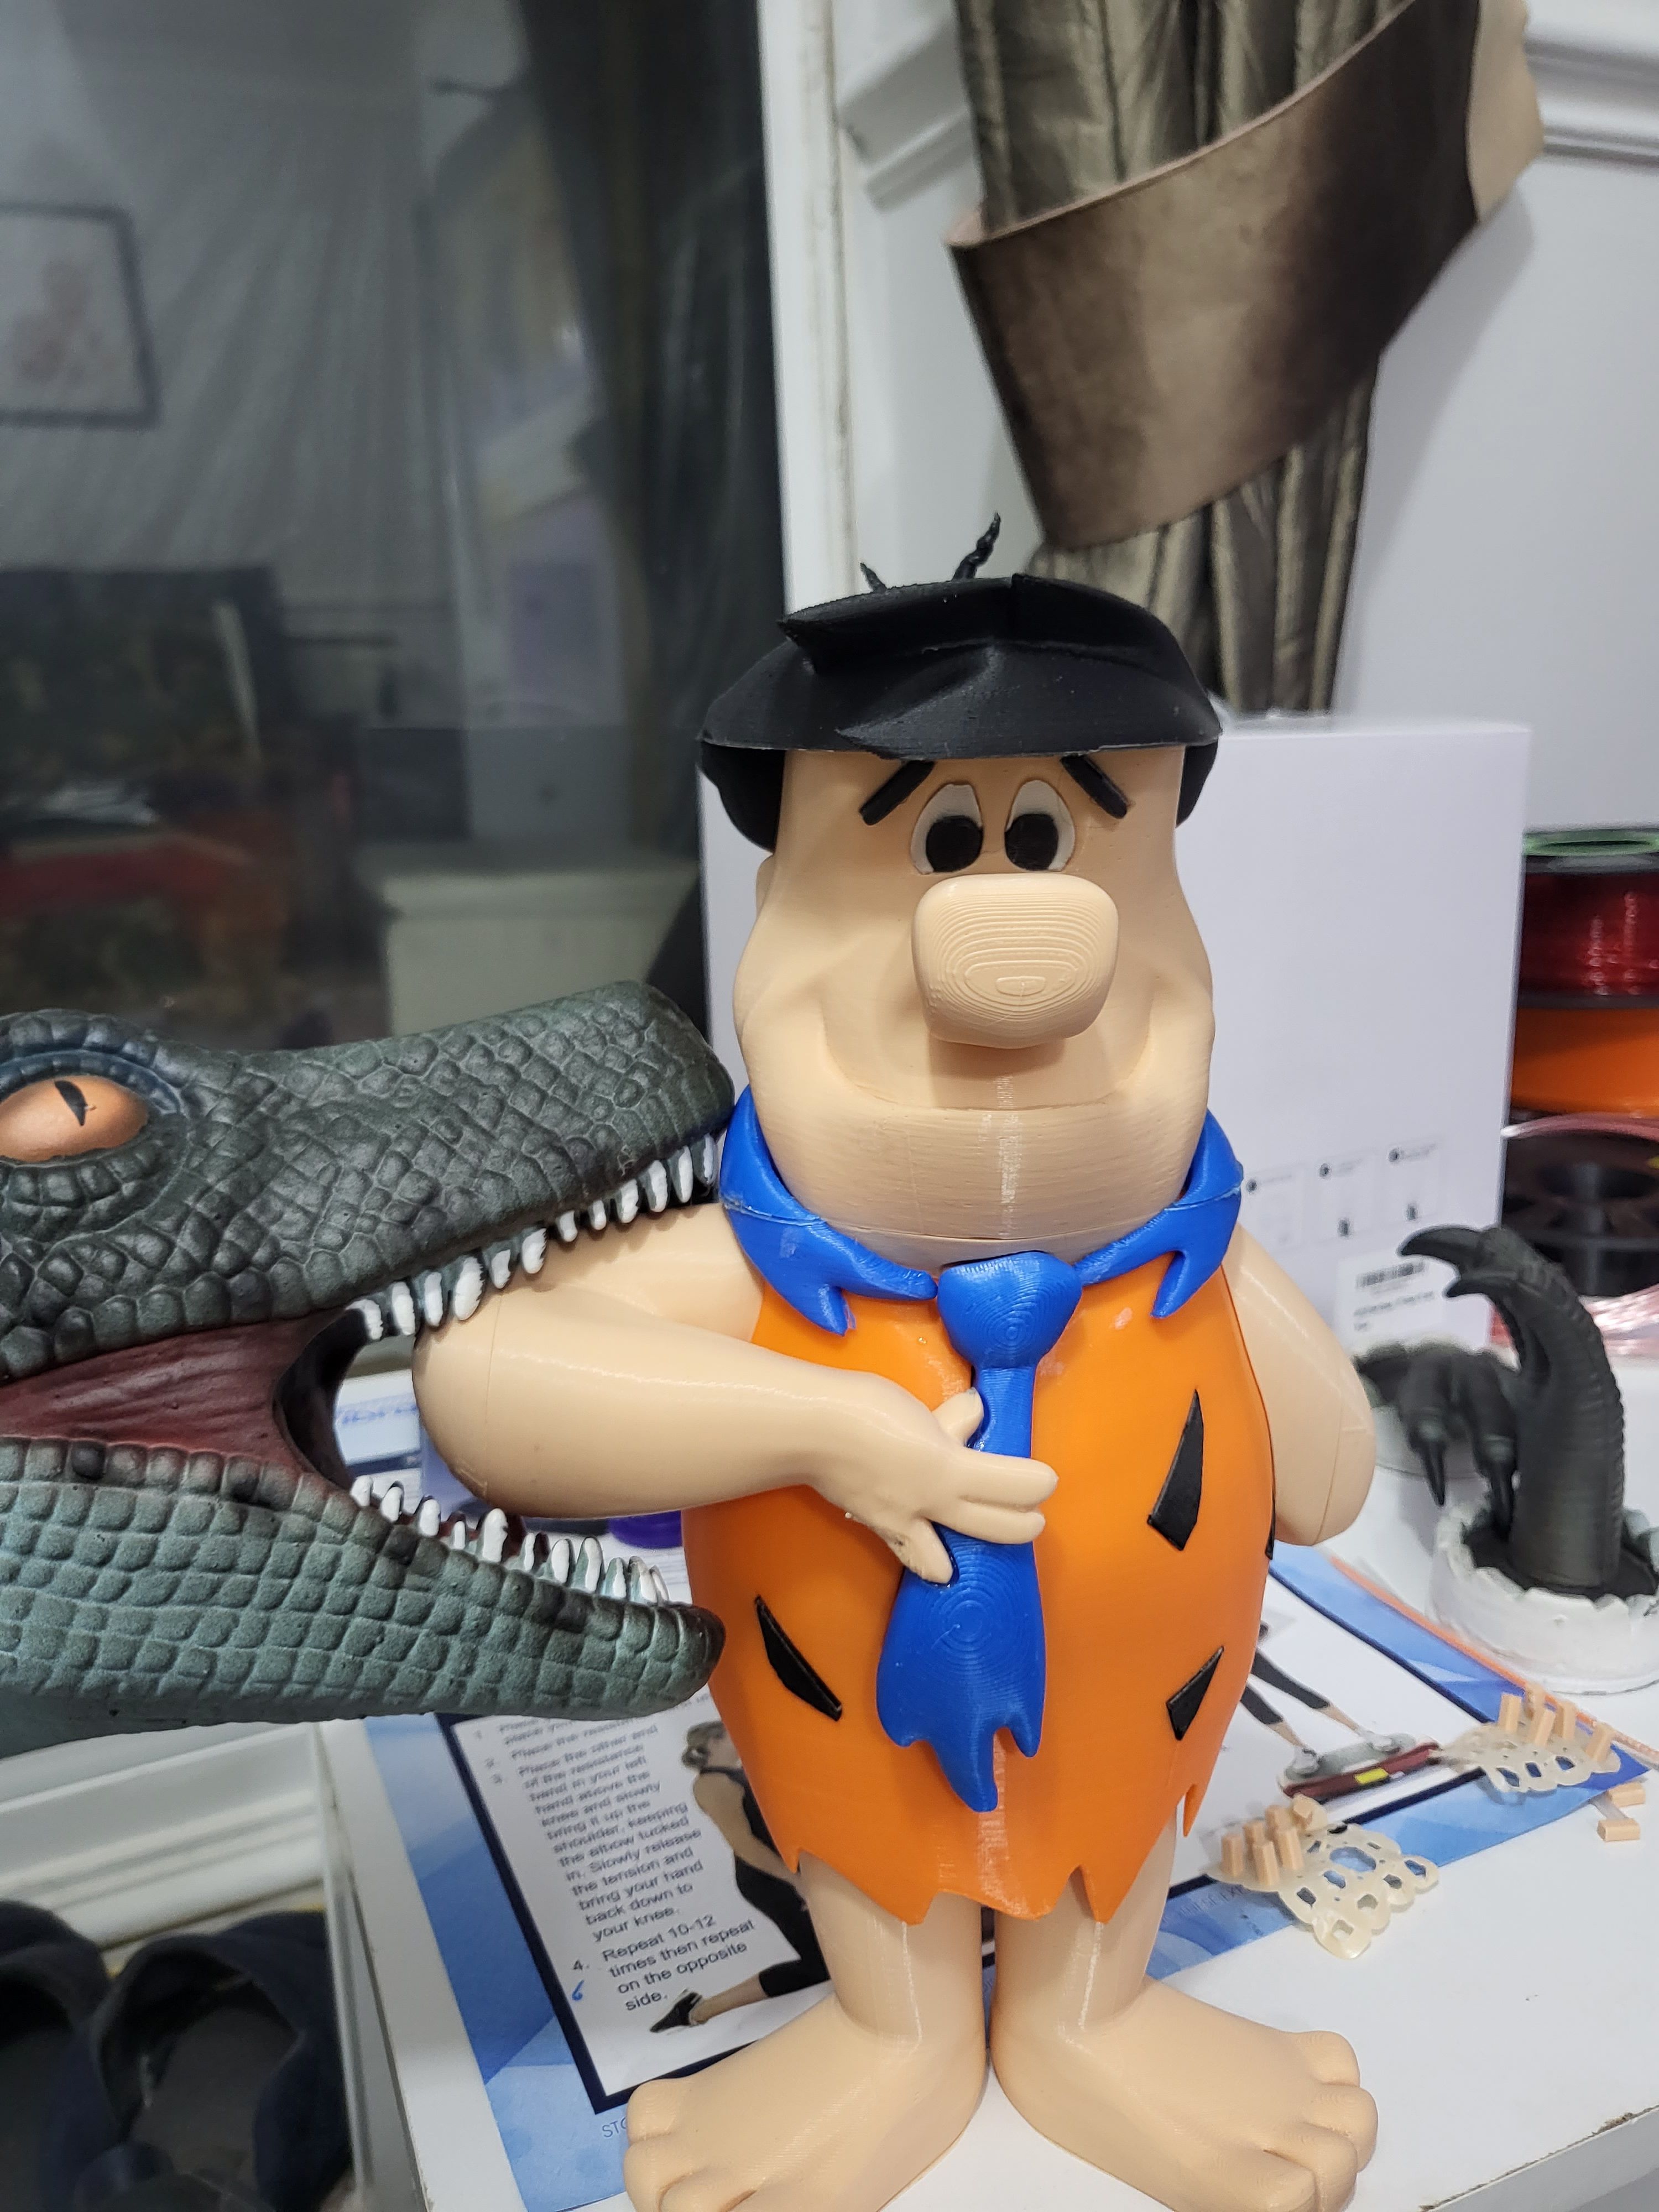 3D printable Fred Flintstone • made with Prusa・Cults